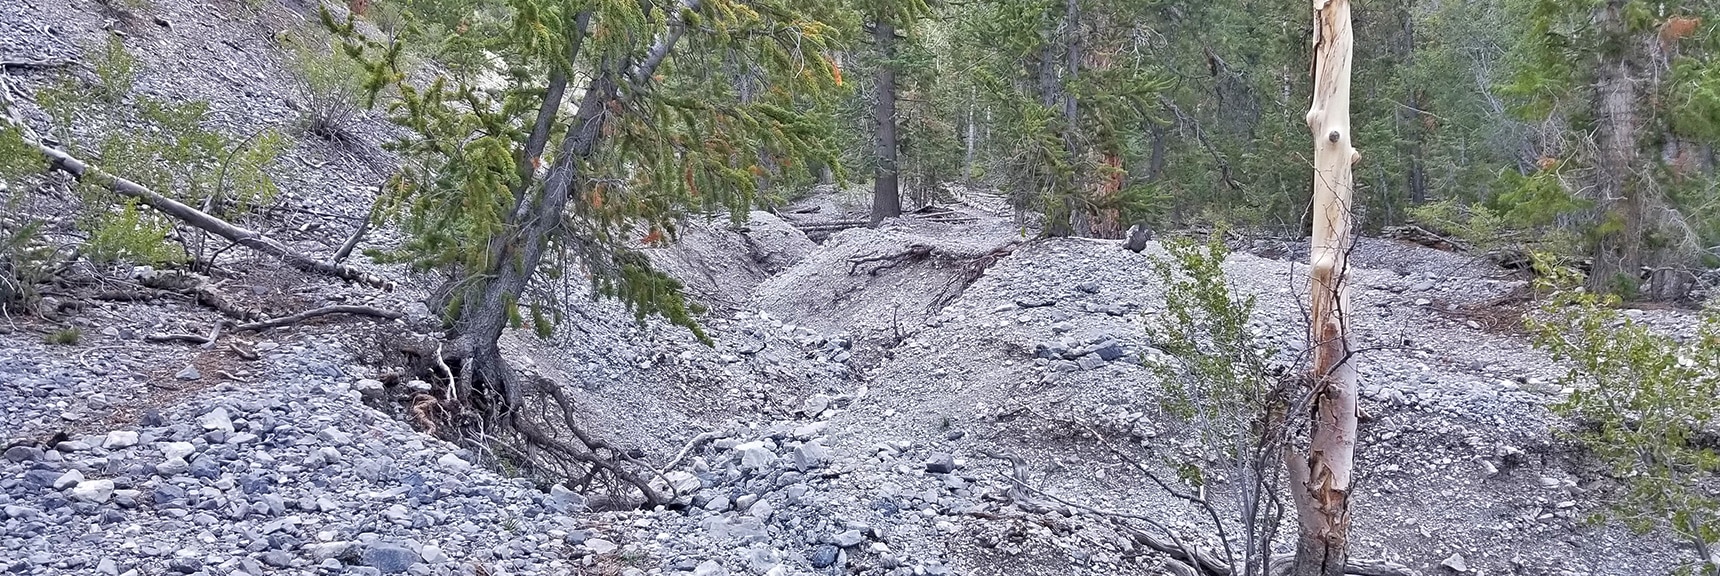 4WD Road and Trail End at Approach Wash. Navigate Path of Least Resistance Up Wash. | Mummy Mountain Summit Approach from Lee Canyon | Mt. Charleston Wilderness | Spring Mountains, Nevada